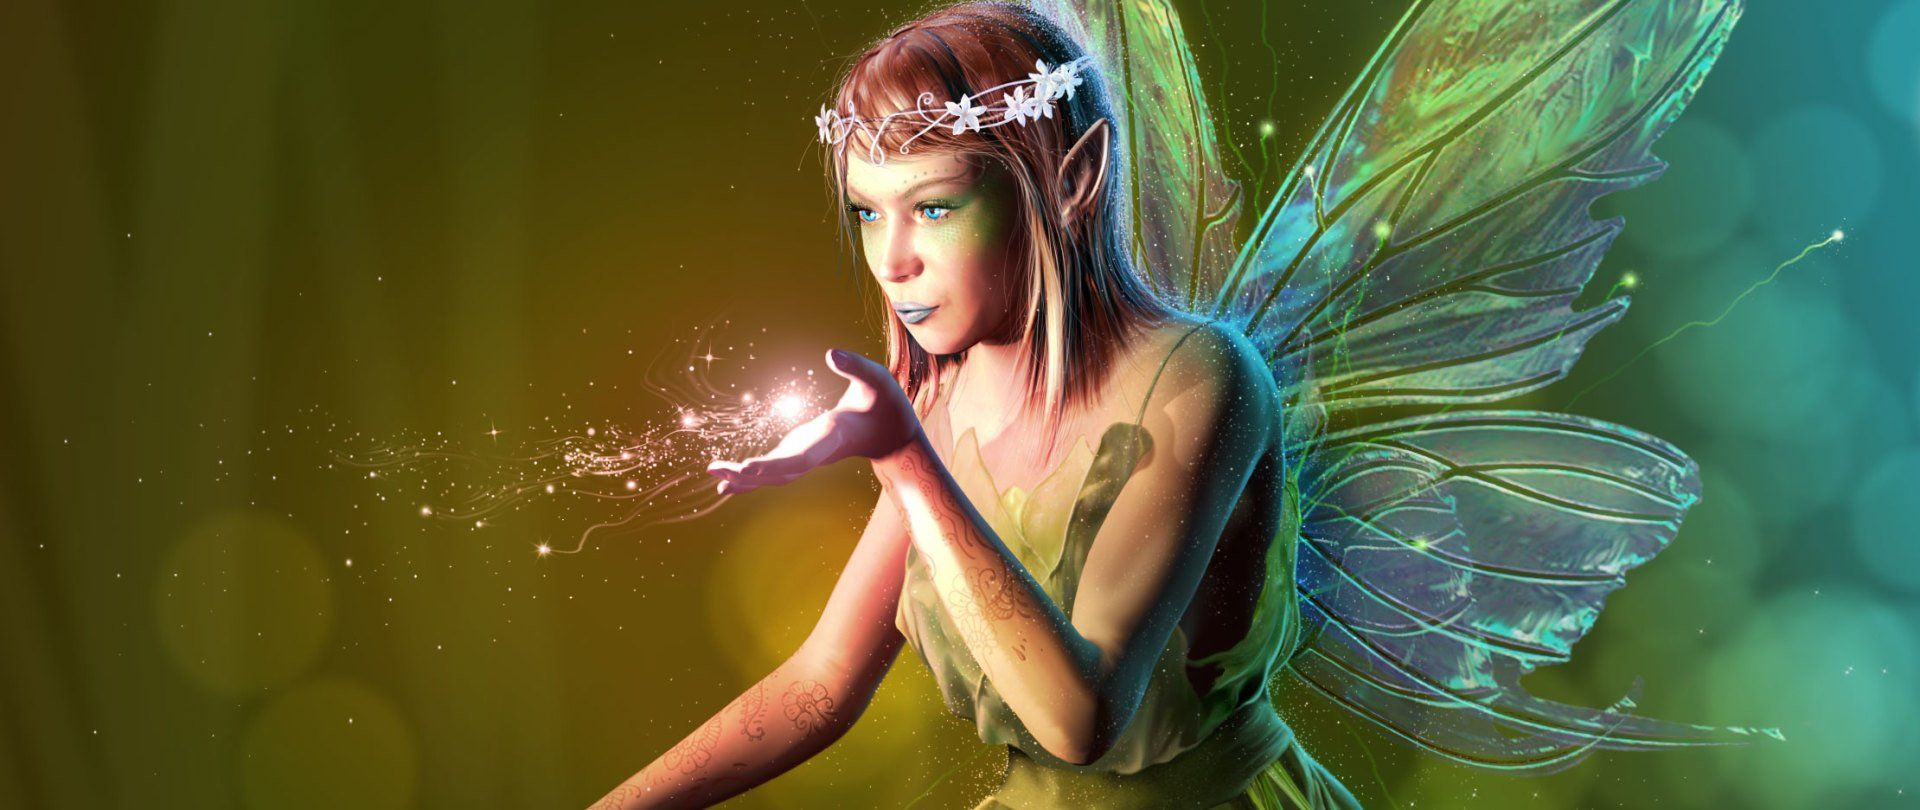 Bring your project to life, with great illustration! Here we see a photorealistic digital painting of a magical woodland fairy, hovering over white wood sorrel flowers, blowing fairy dust. Fantasy art of a beautiful mythical creature.